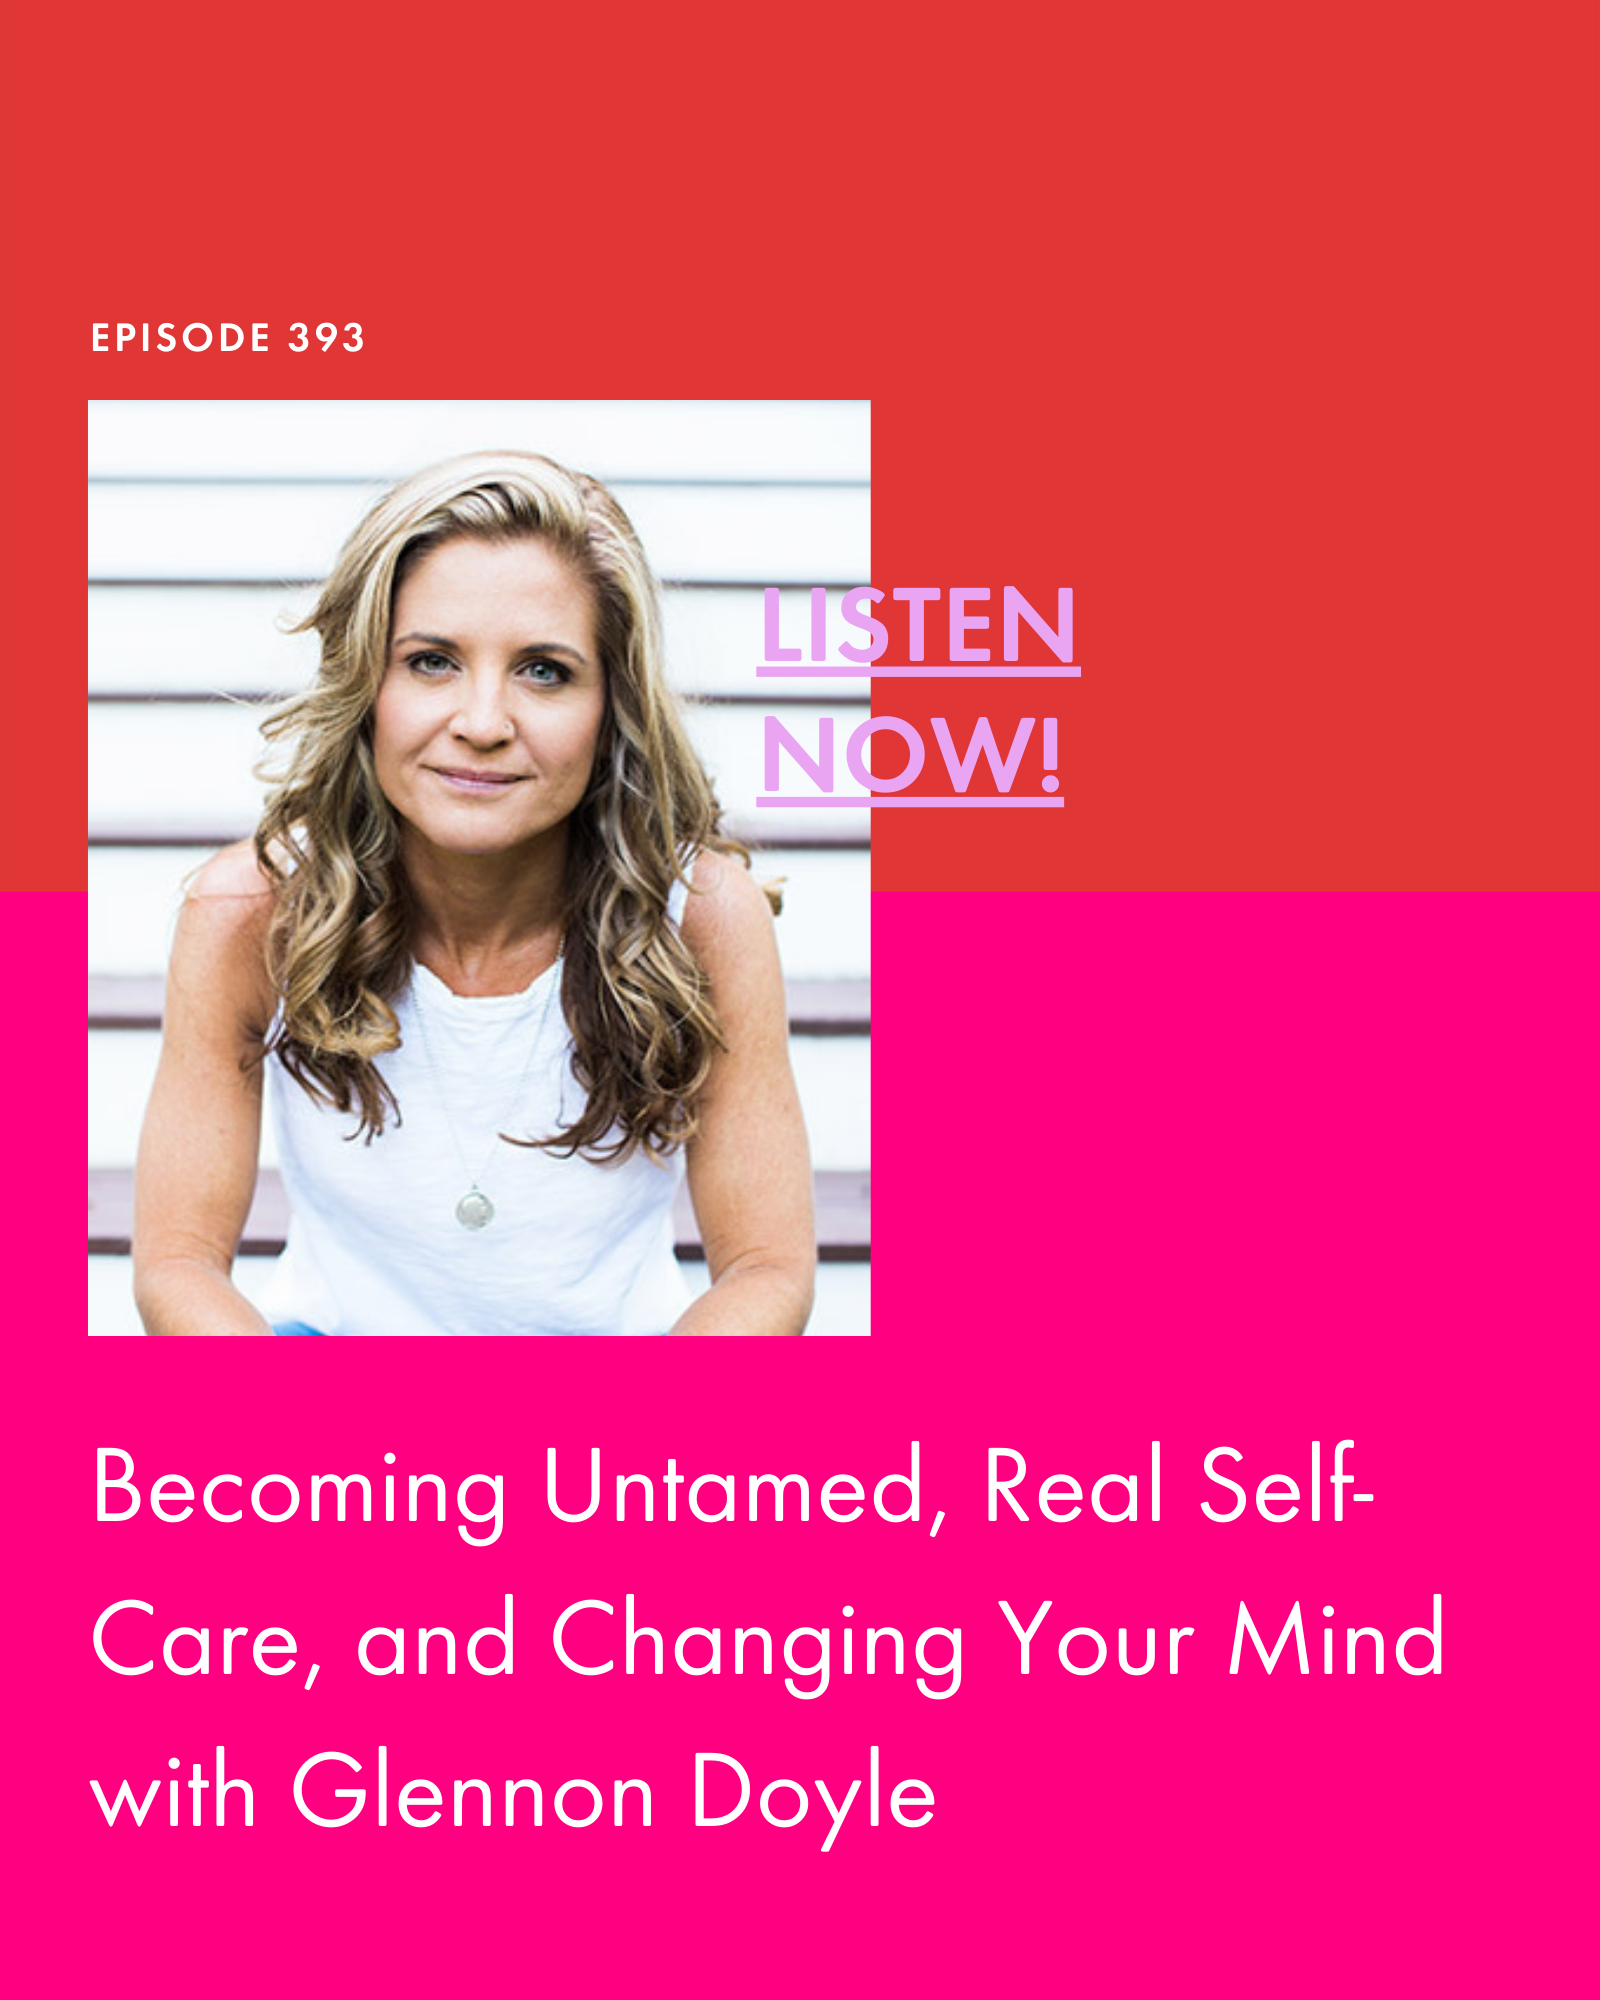 Becoming Untamed, Real Self-Care, and Changing Your Mind with Glennon Doyle